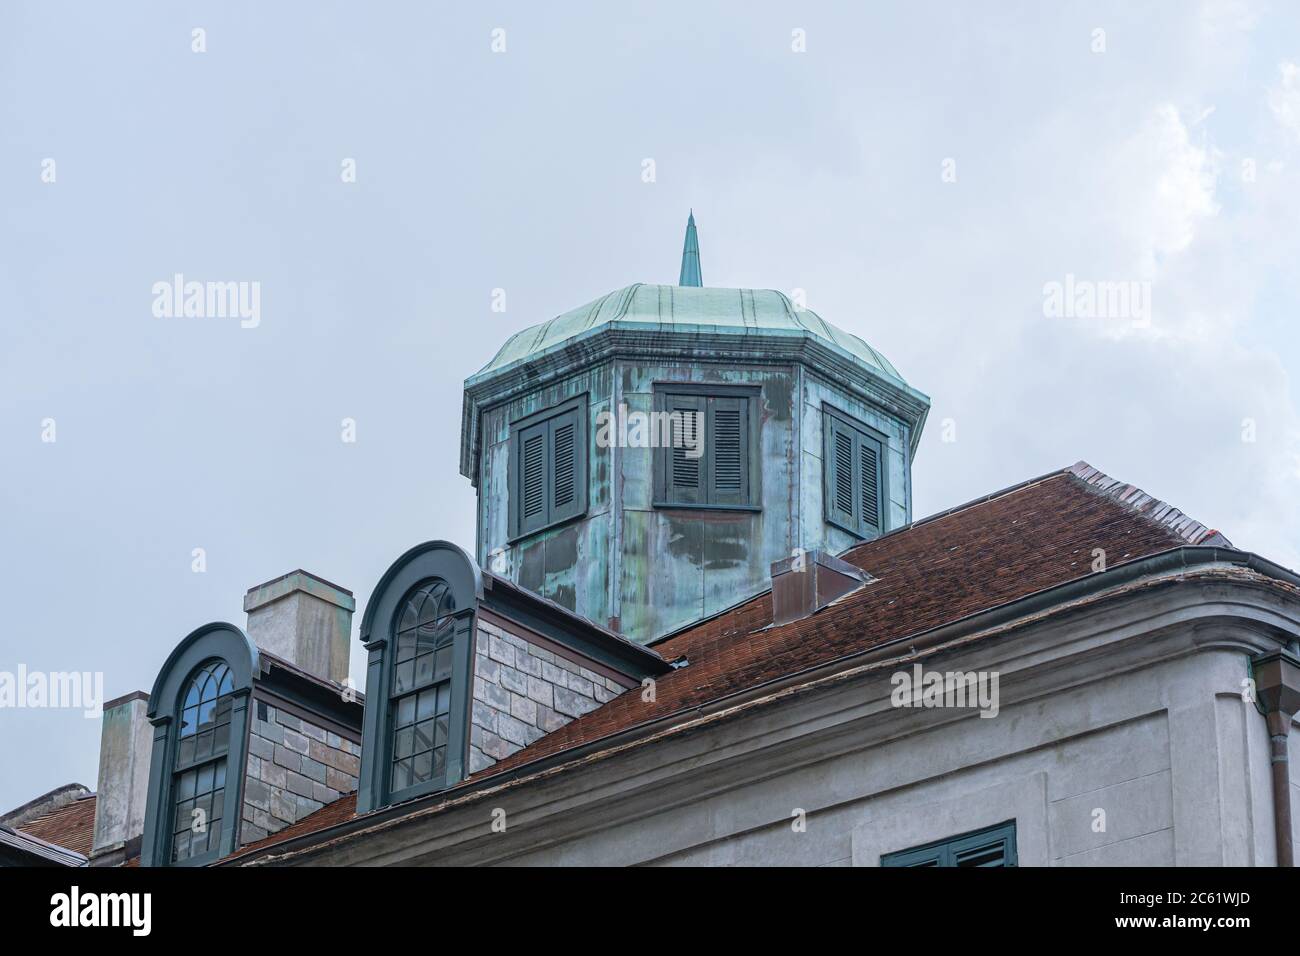 New Orleans, Louisiana/USA - 07/05/2020: Roof of the Napoleon House on Chartres Street featuring domed cupola and dormer windows Stock Photo